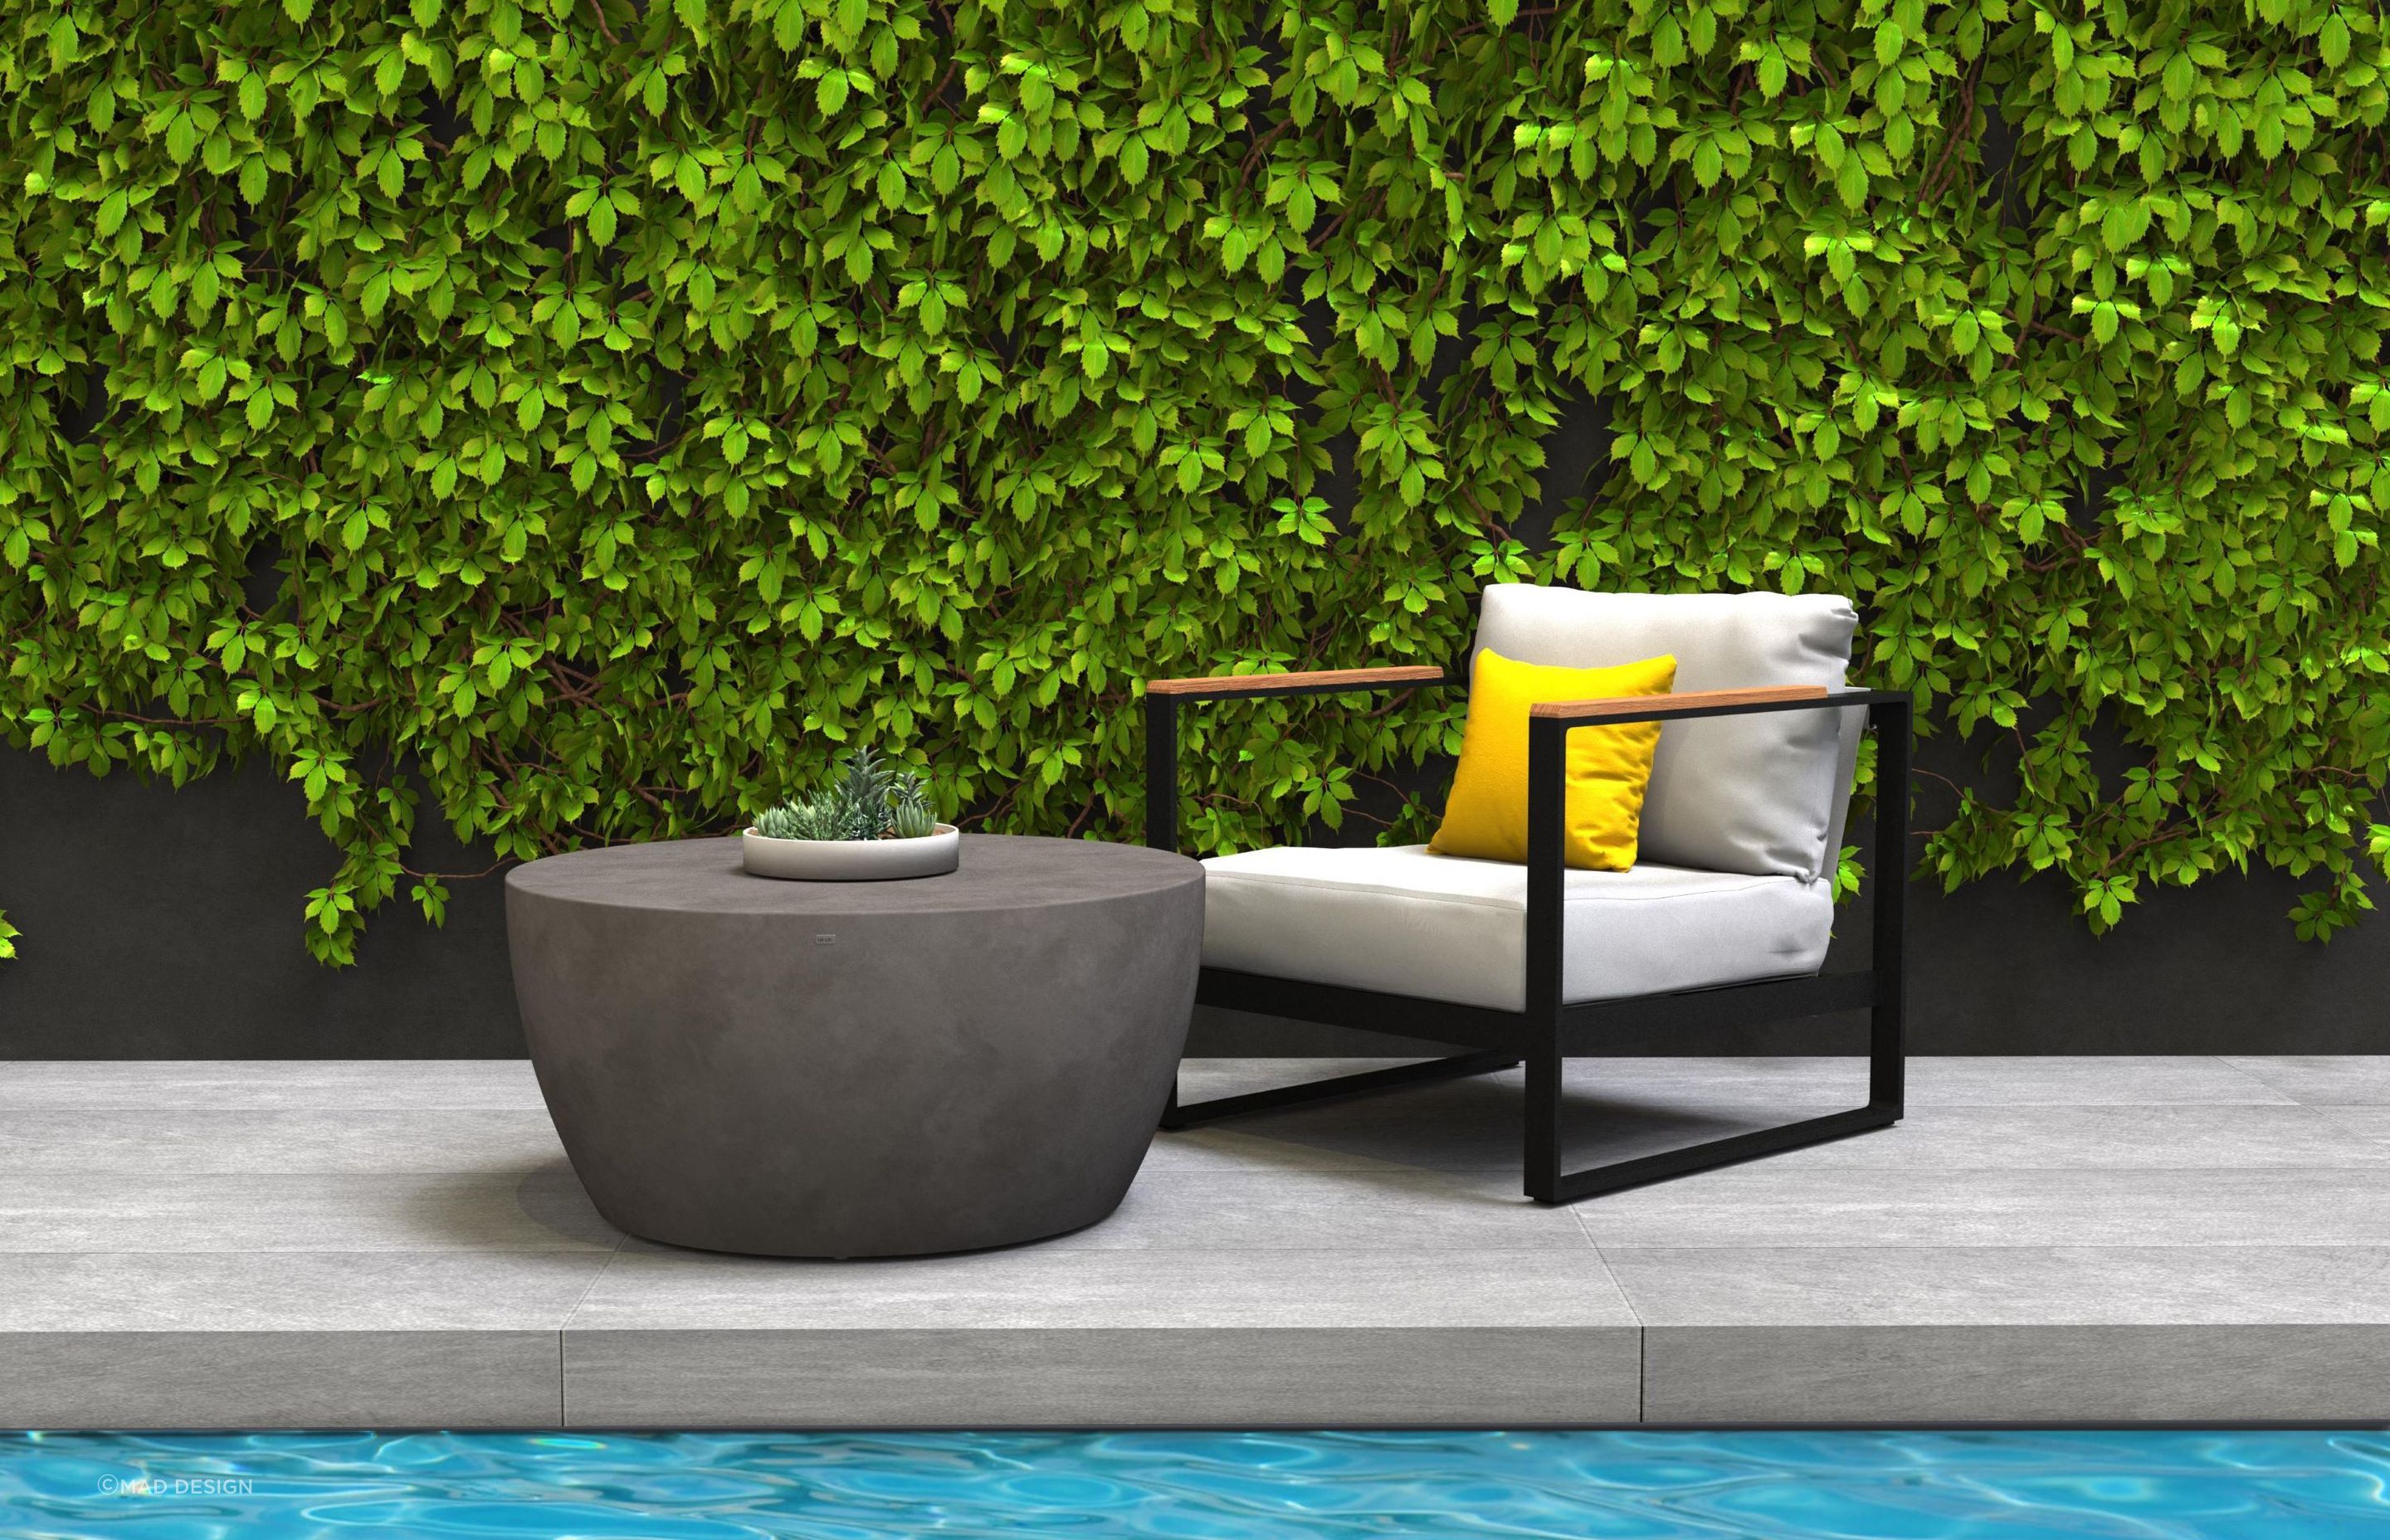 Made from 95% recycled materials and green cement, the Blinde™ Circ M2 Concrete Coffee Table is a bold, eco-friendly choice.